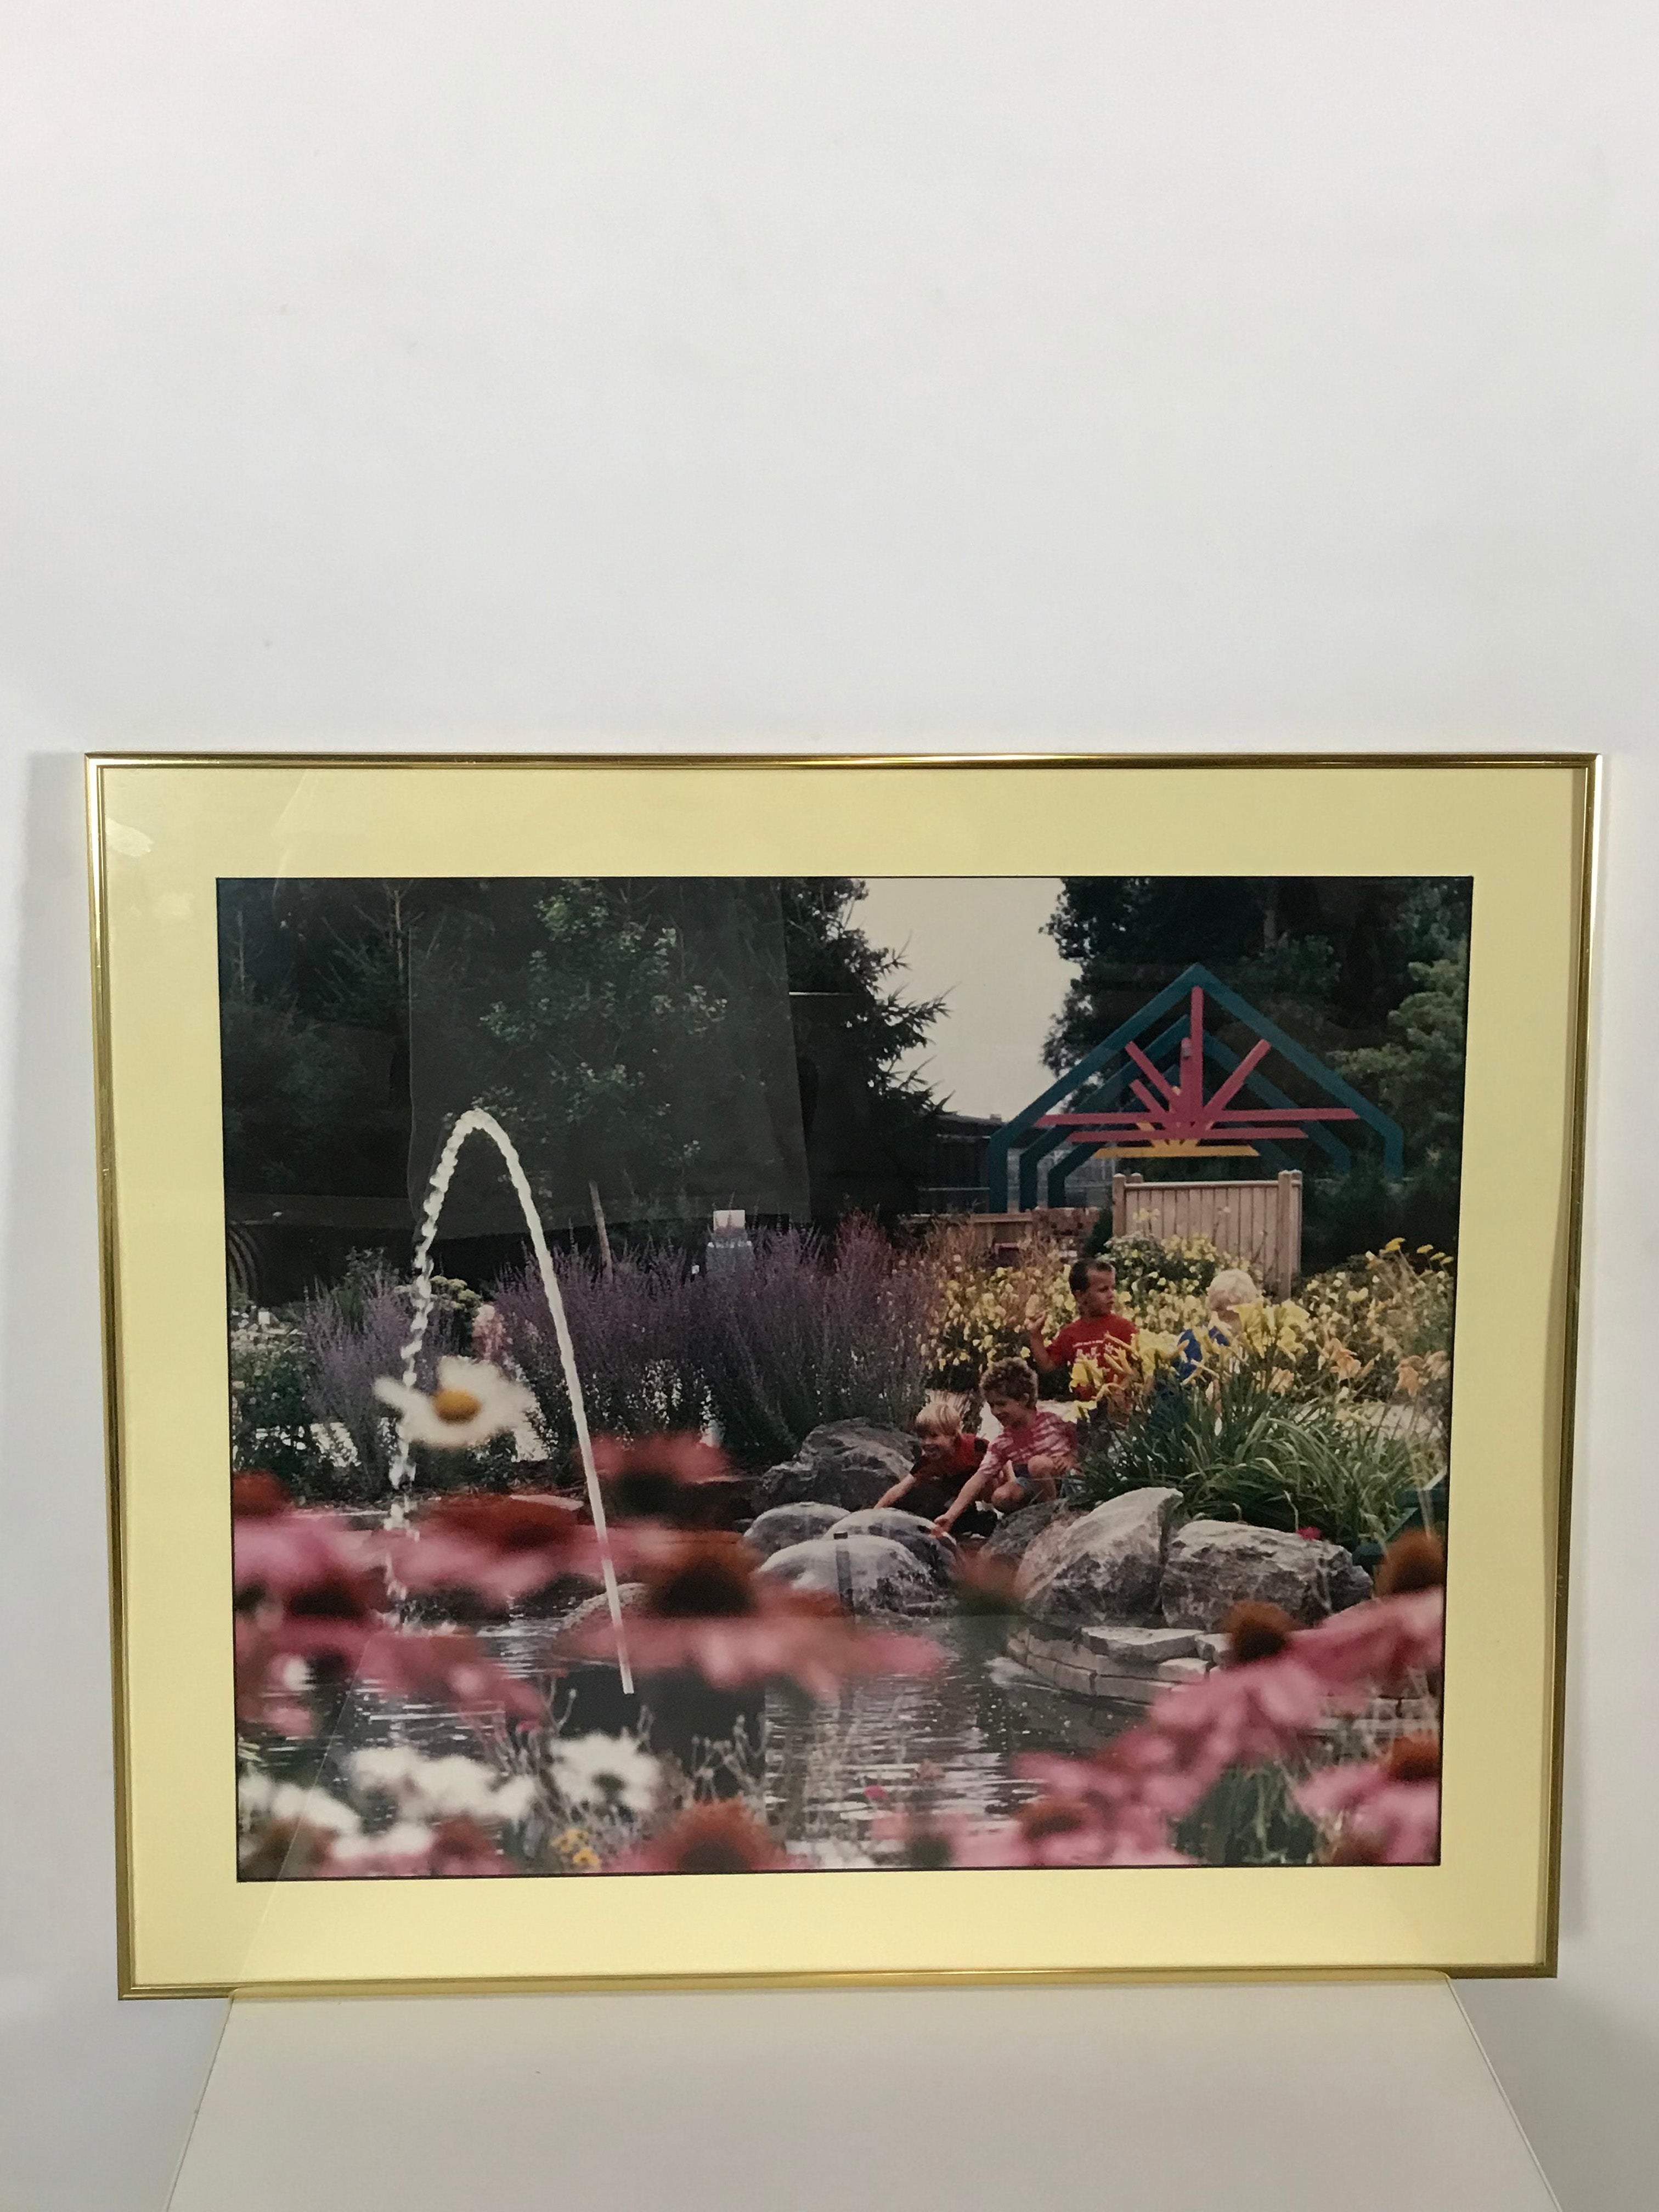 Frames Unlimited Large Picture of Kids Playing by Pond